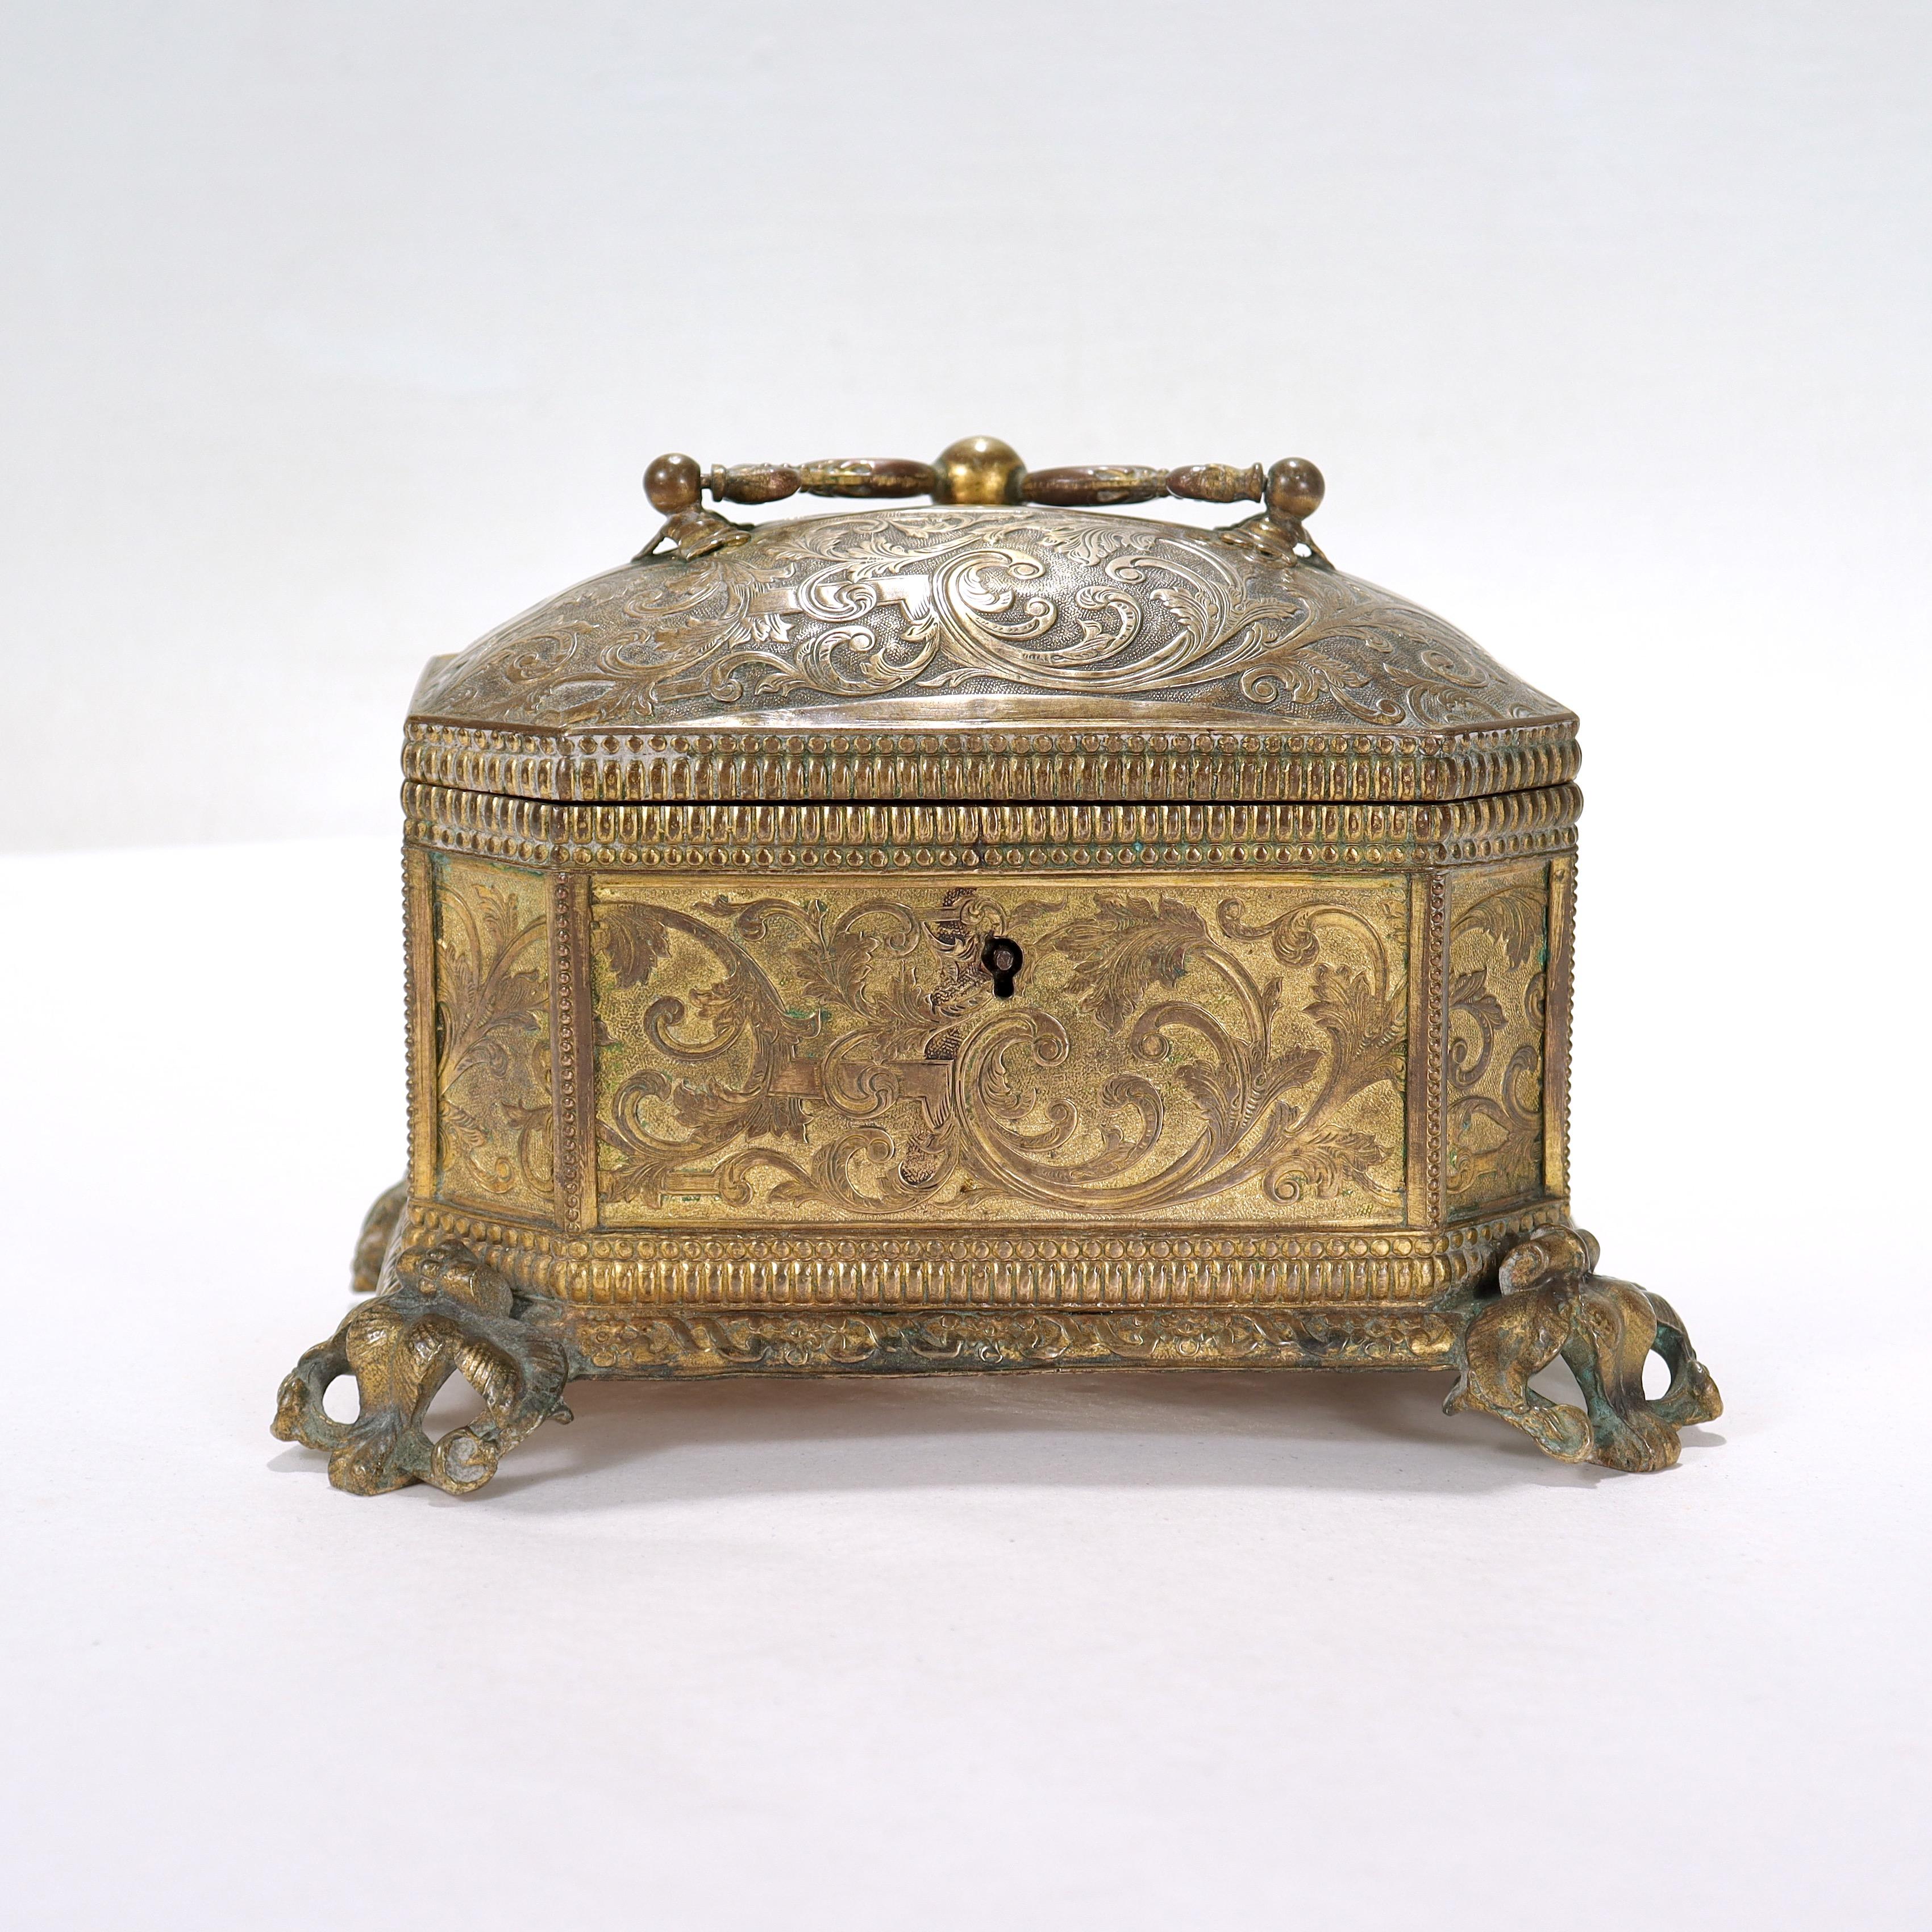 A fine antique 19th Century brass casket or table box.

In the Renaissance Revival style.

With embossed brass sheet side panels, a domed lid, bail handle, and scroll & leaf work feet. 

Retains some of the original gilding.

Decorated throughout